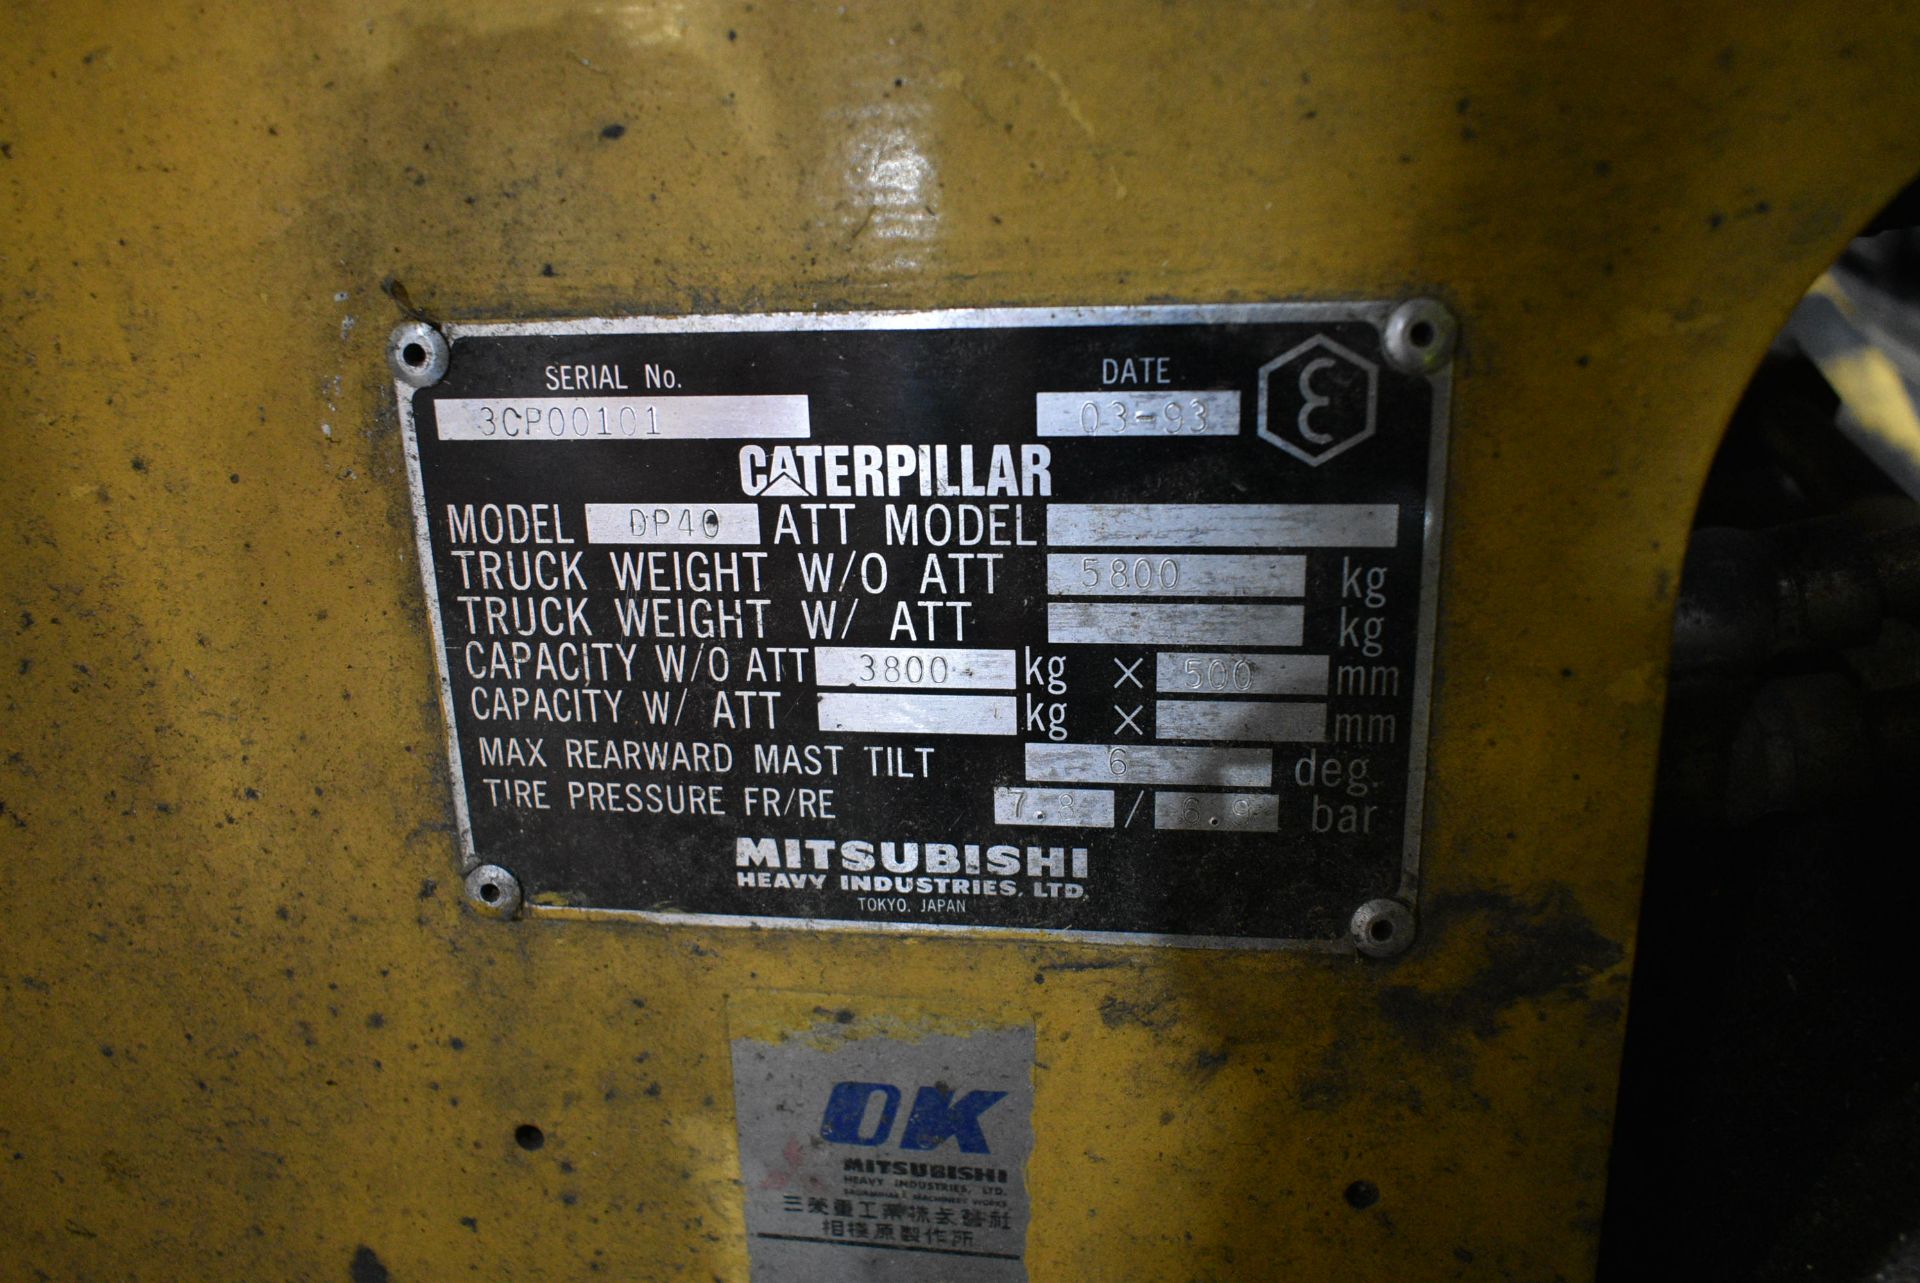 Caterpillar DP40 DIESEL ENGINE FORK LIFT TRUCK, serial no. 3CP00101, year of manufacture 1993, - Image 9 of 10